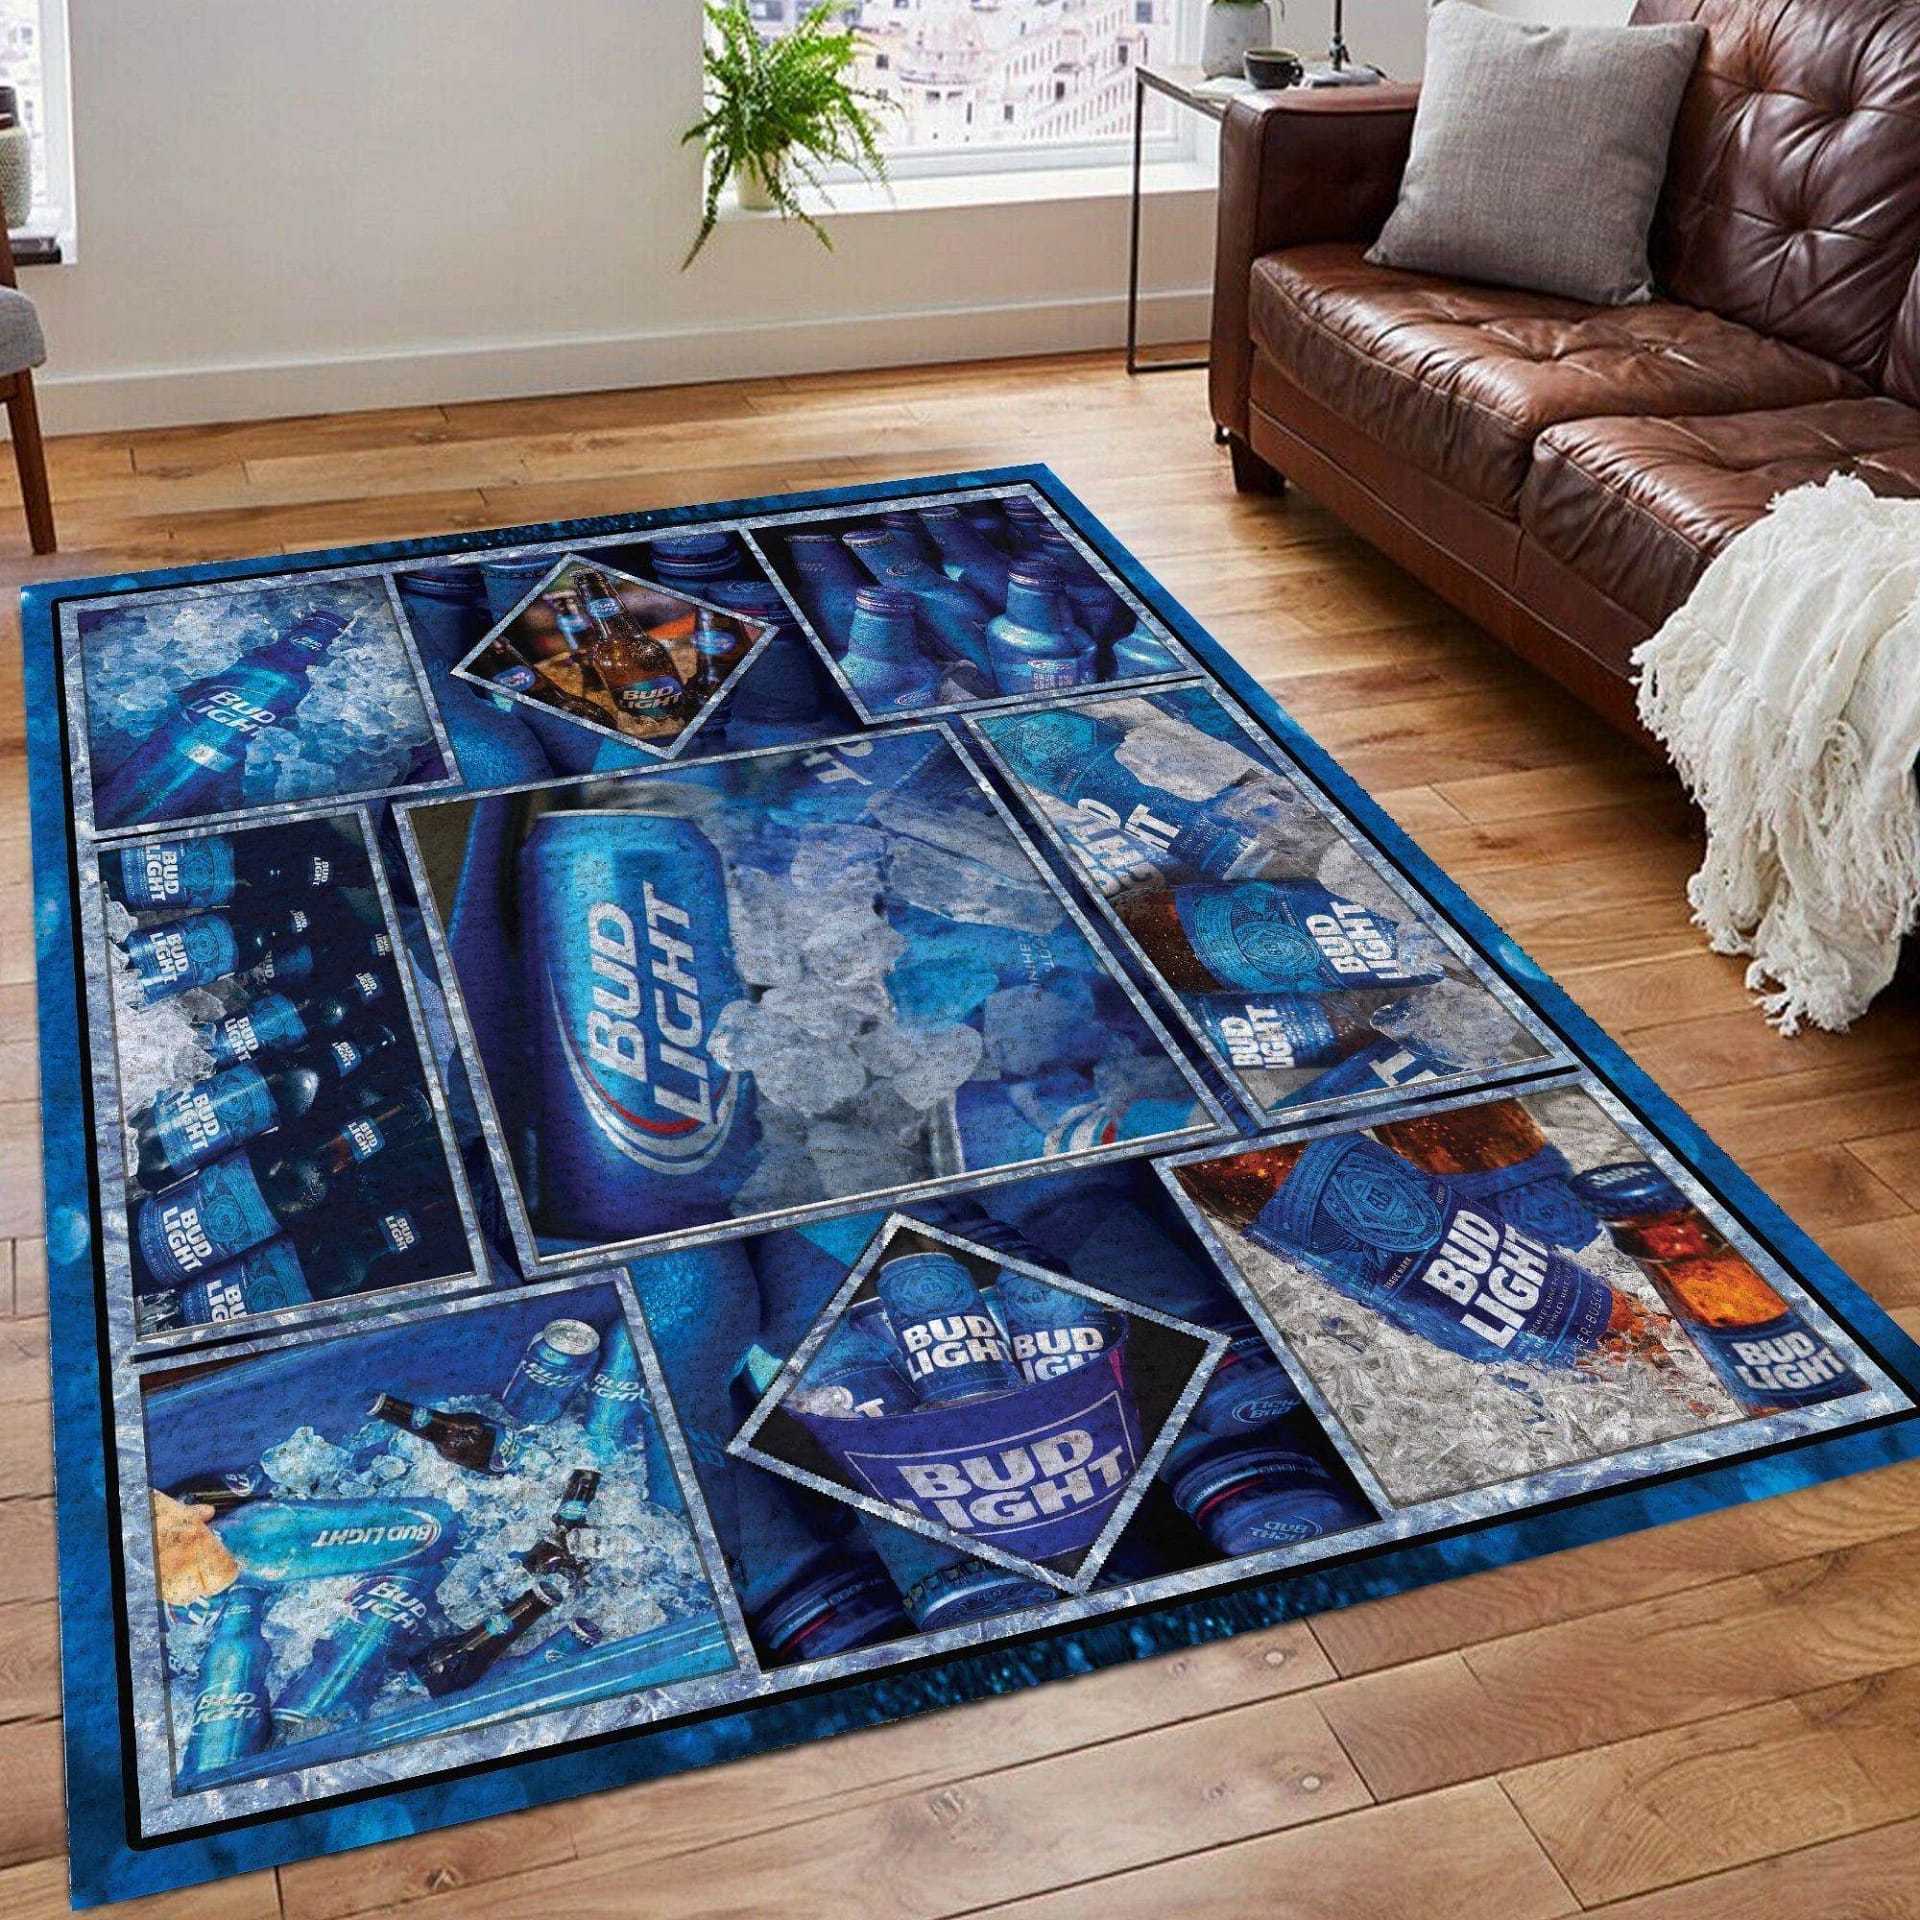 Awesome Drink B Limited Edition Amazon Best Seller Sku 262103 Rug